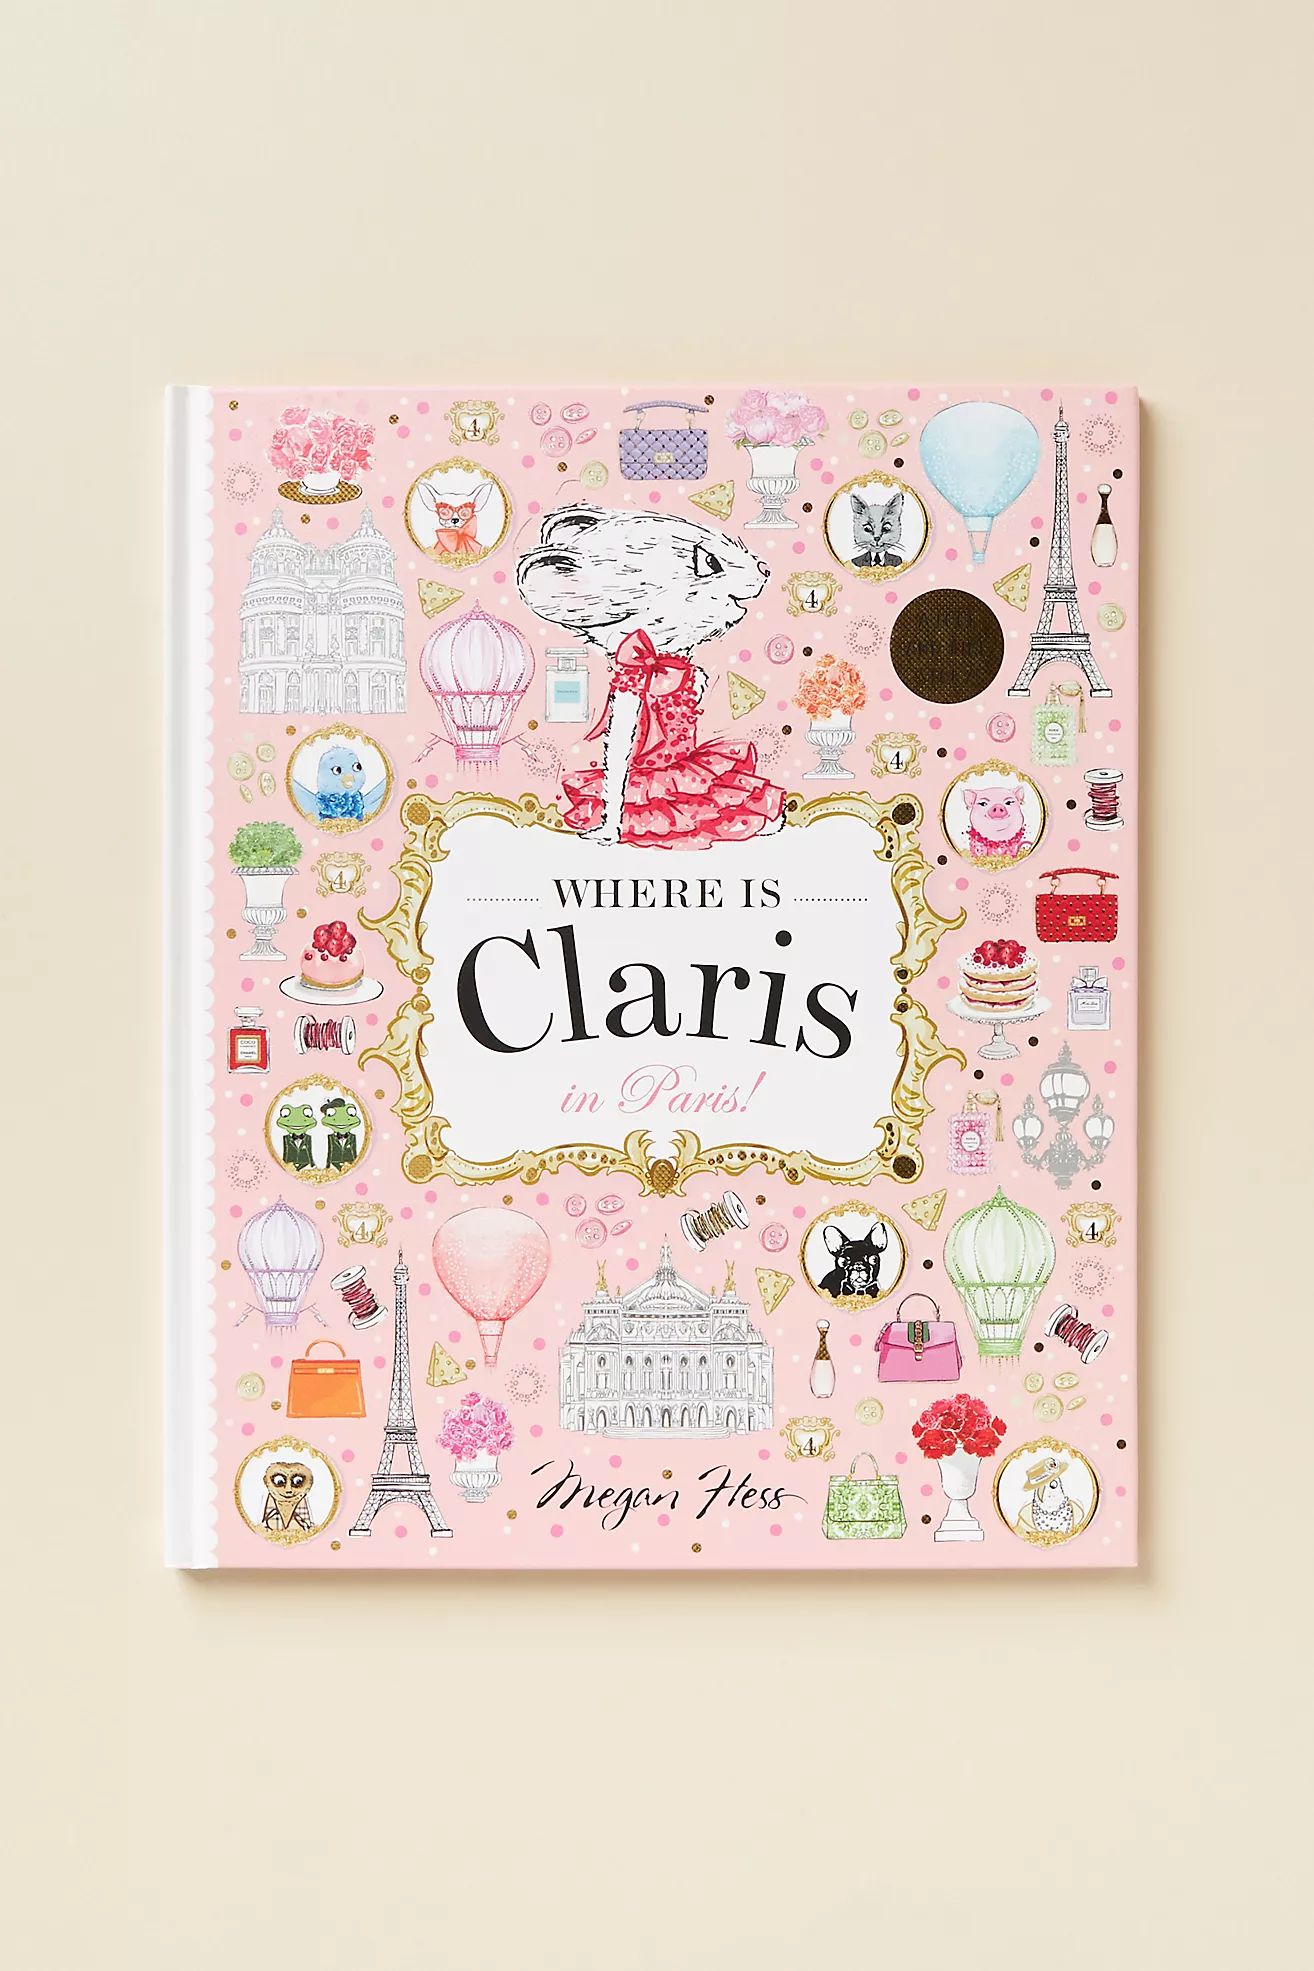 Where is Claris? In Paris: A Look and Find Book | Anthropologie (US)